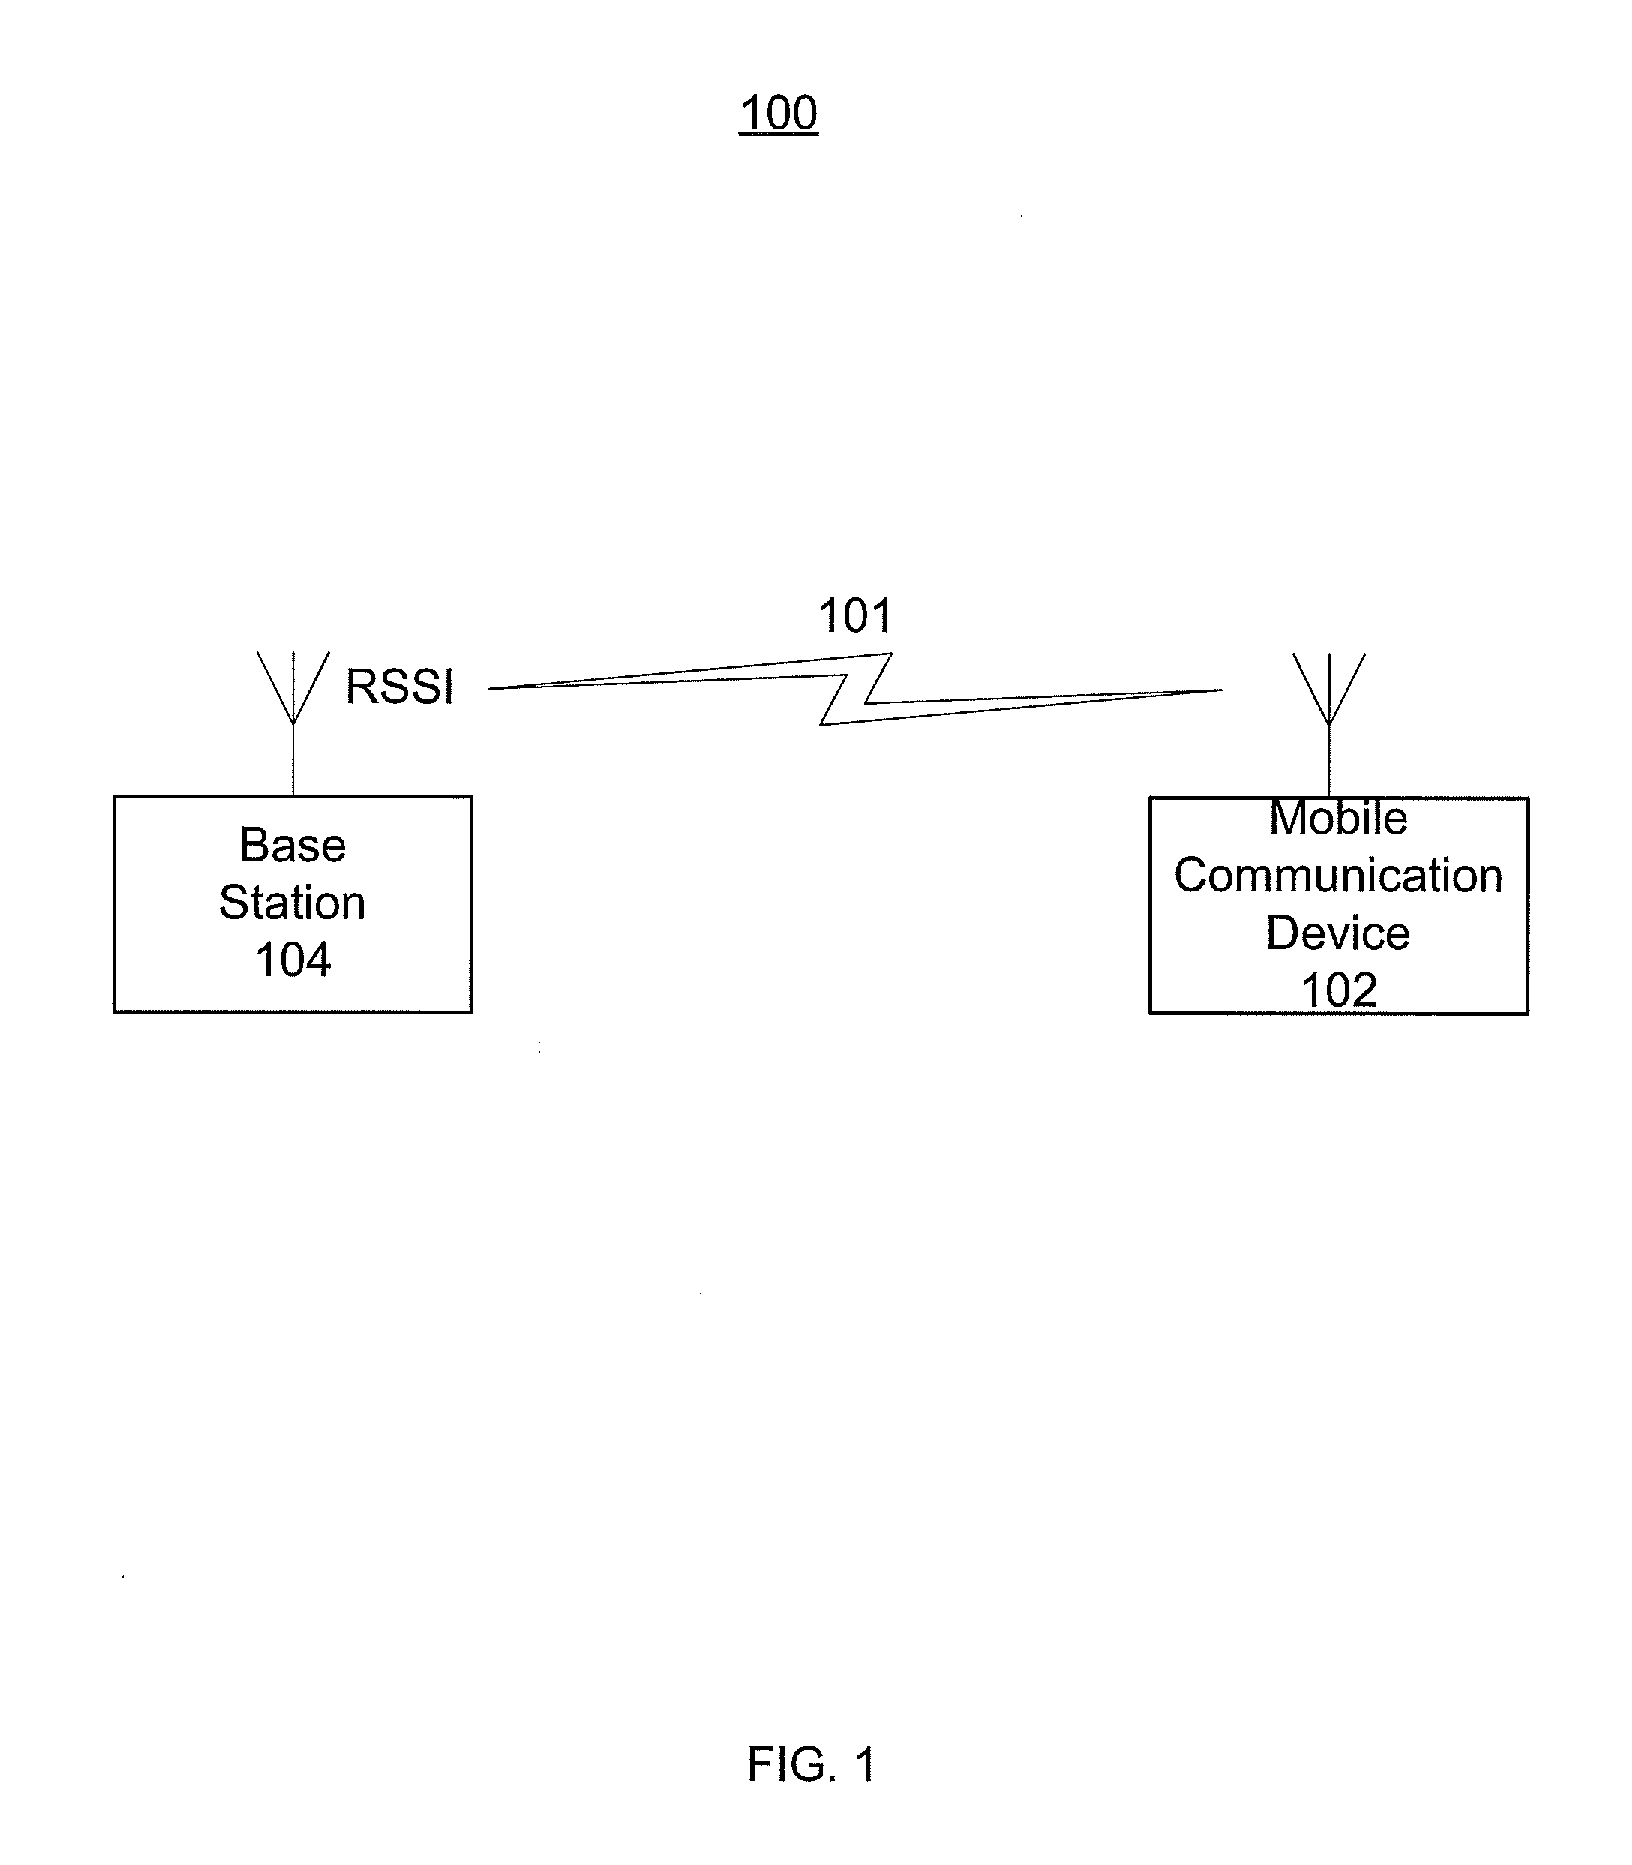 Multiple RF band operation in mobile devices